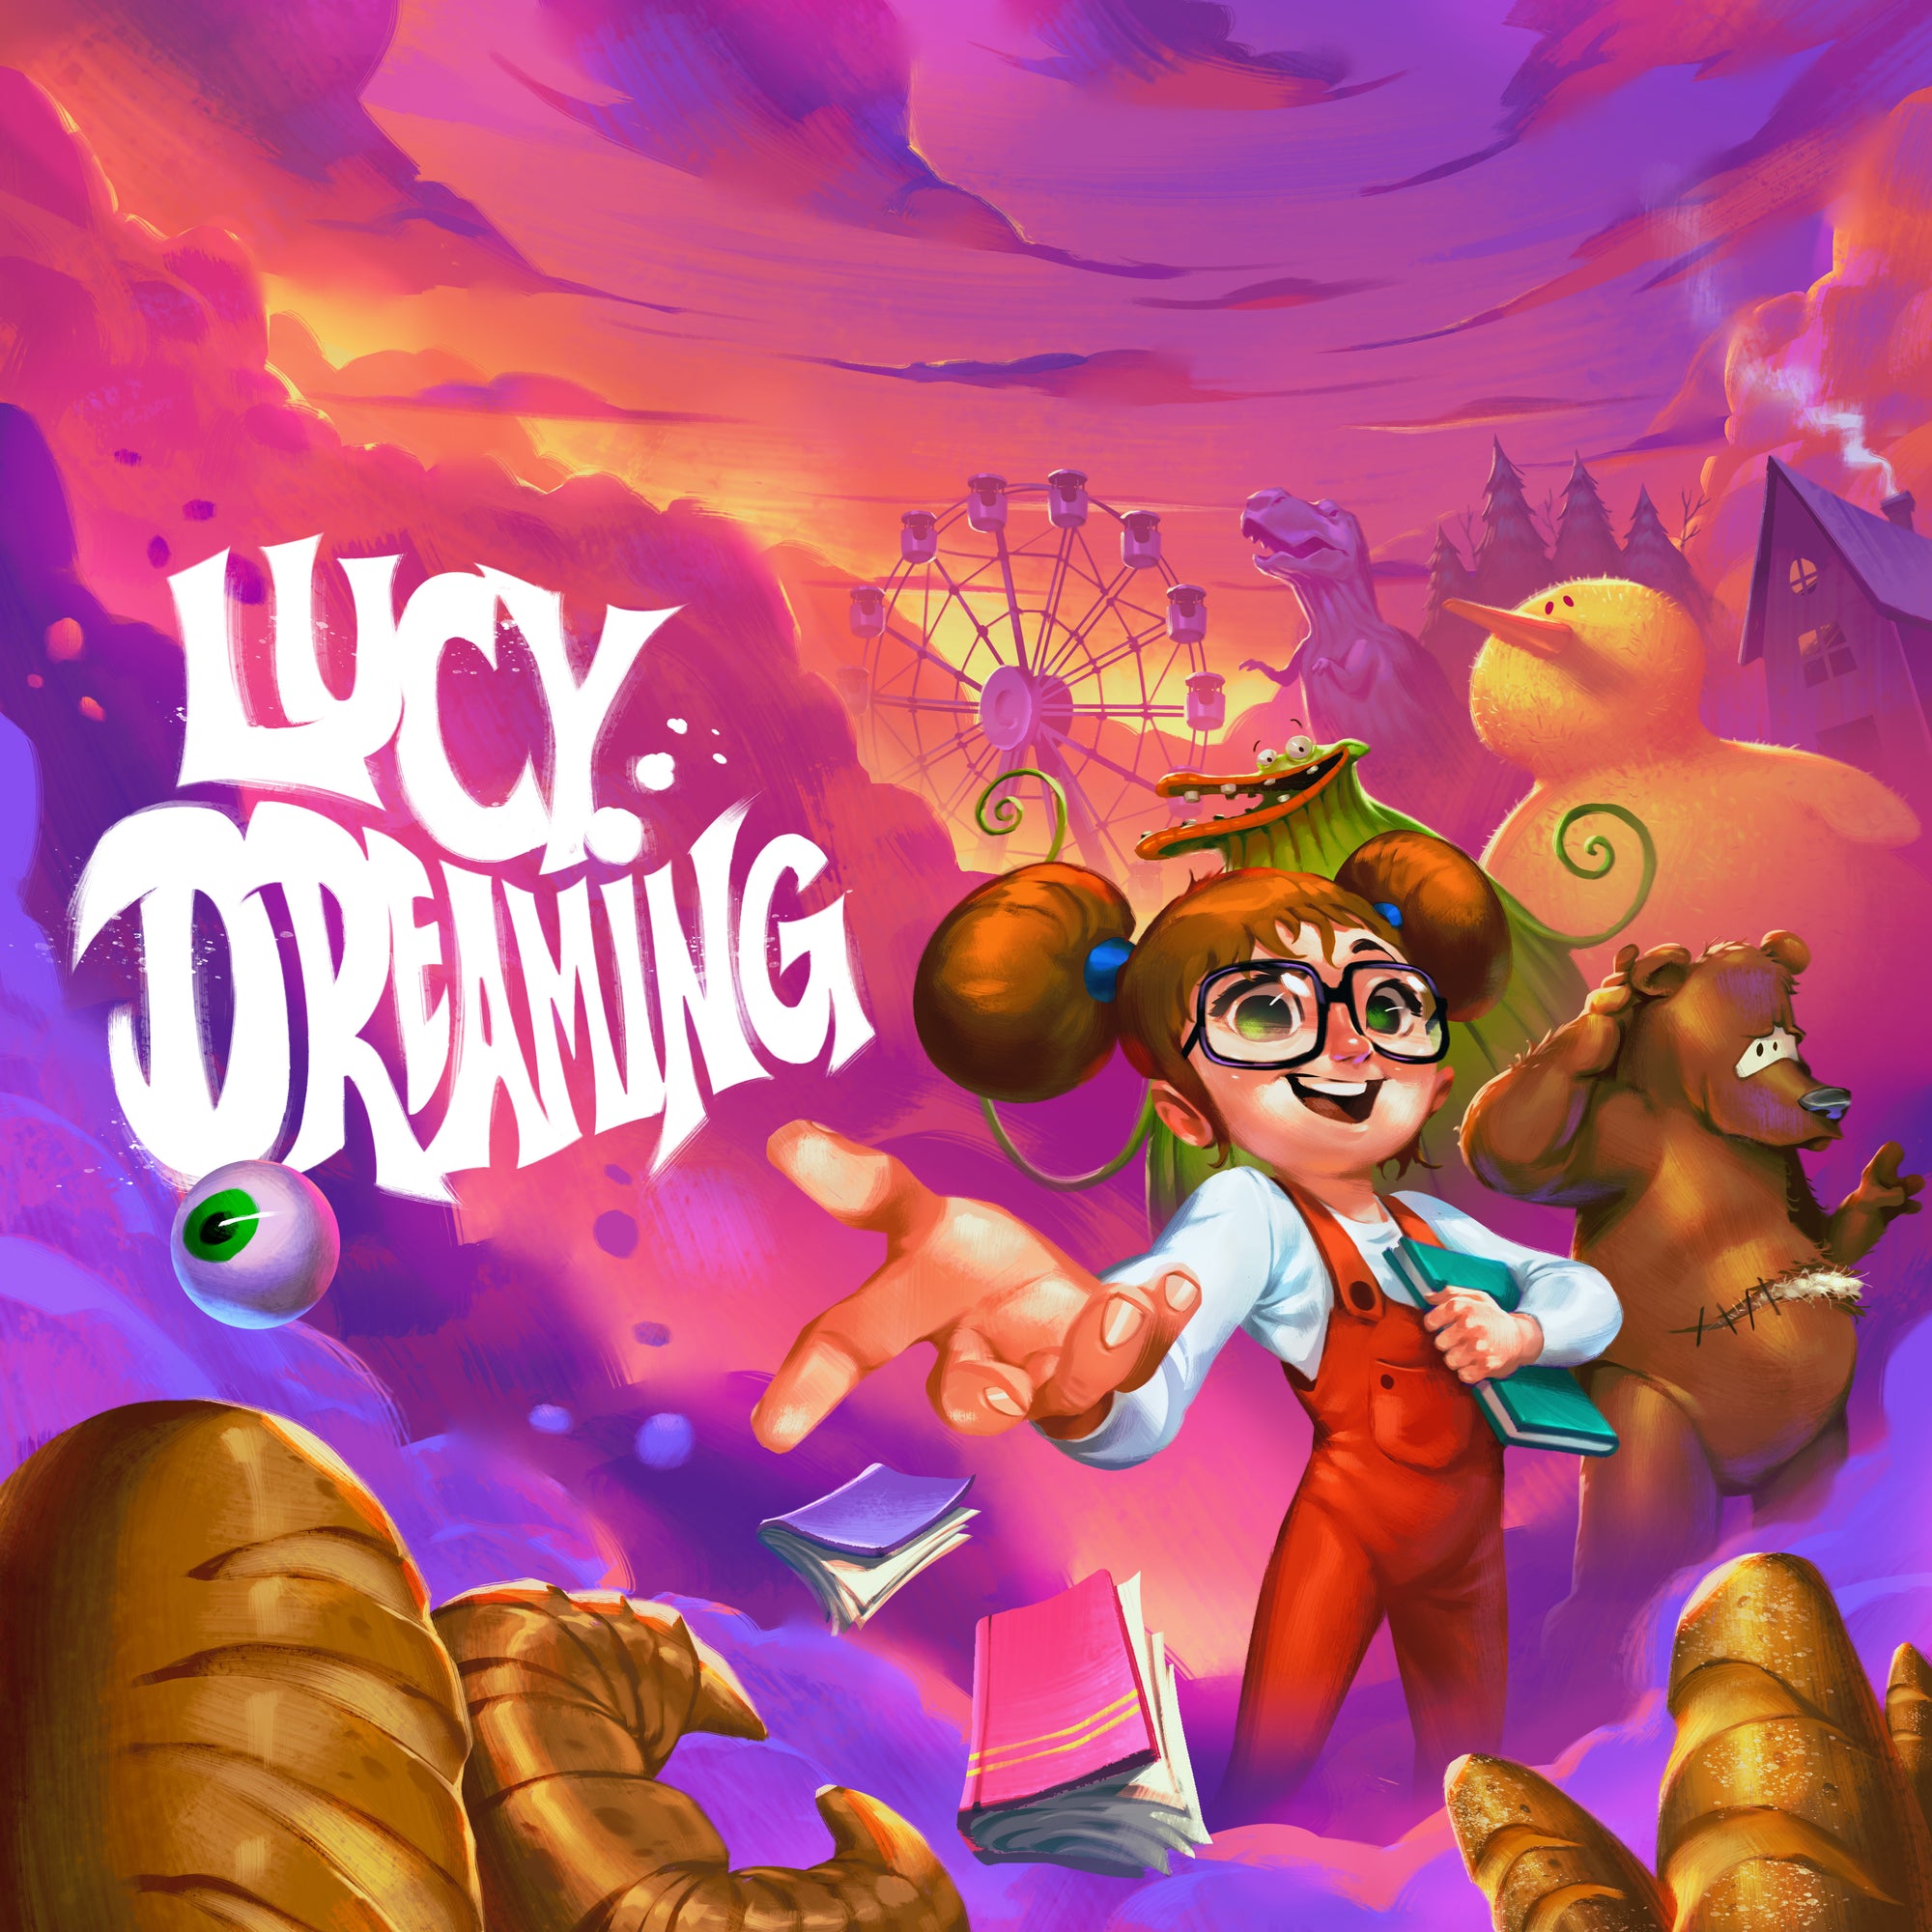 Lucy Dreaming and the Art of Point and Click Adventures